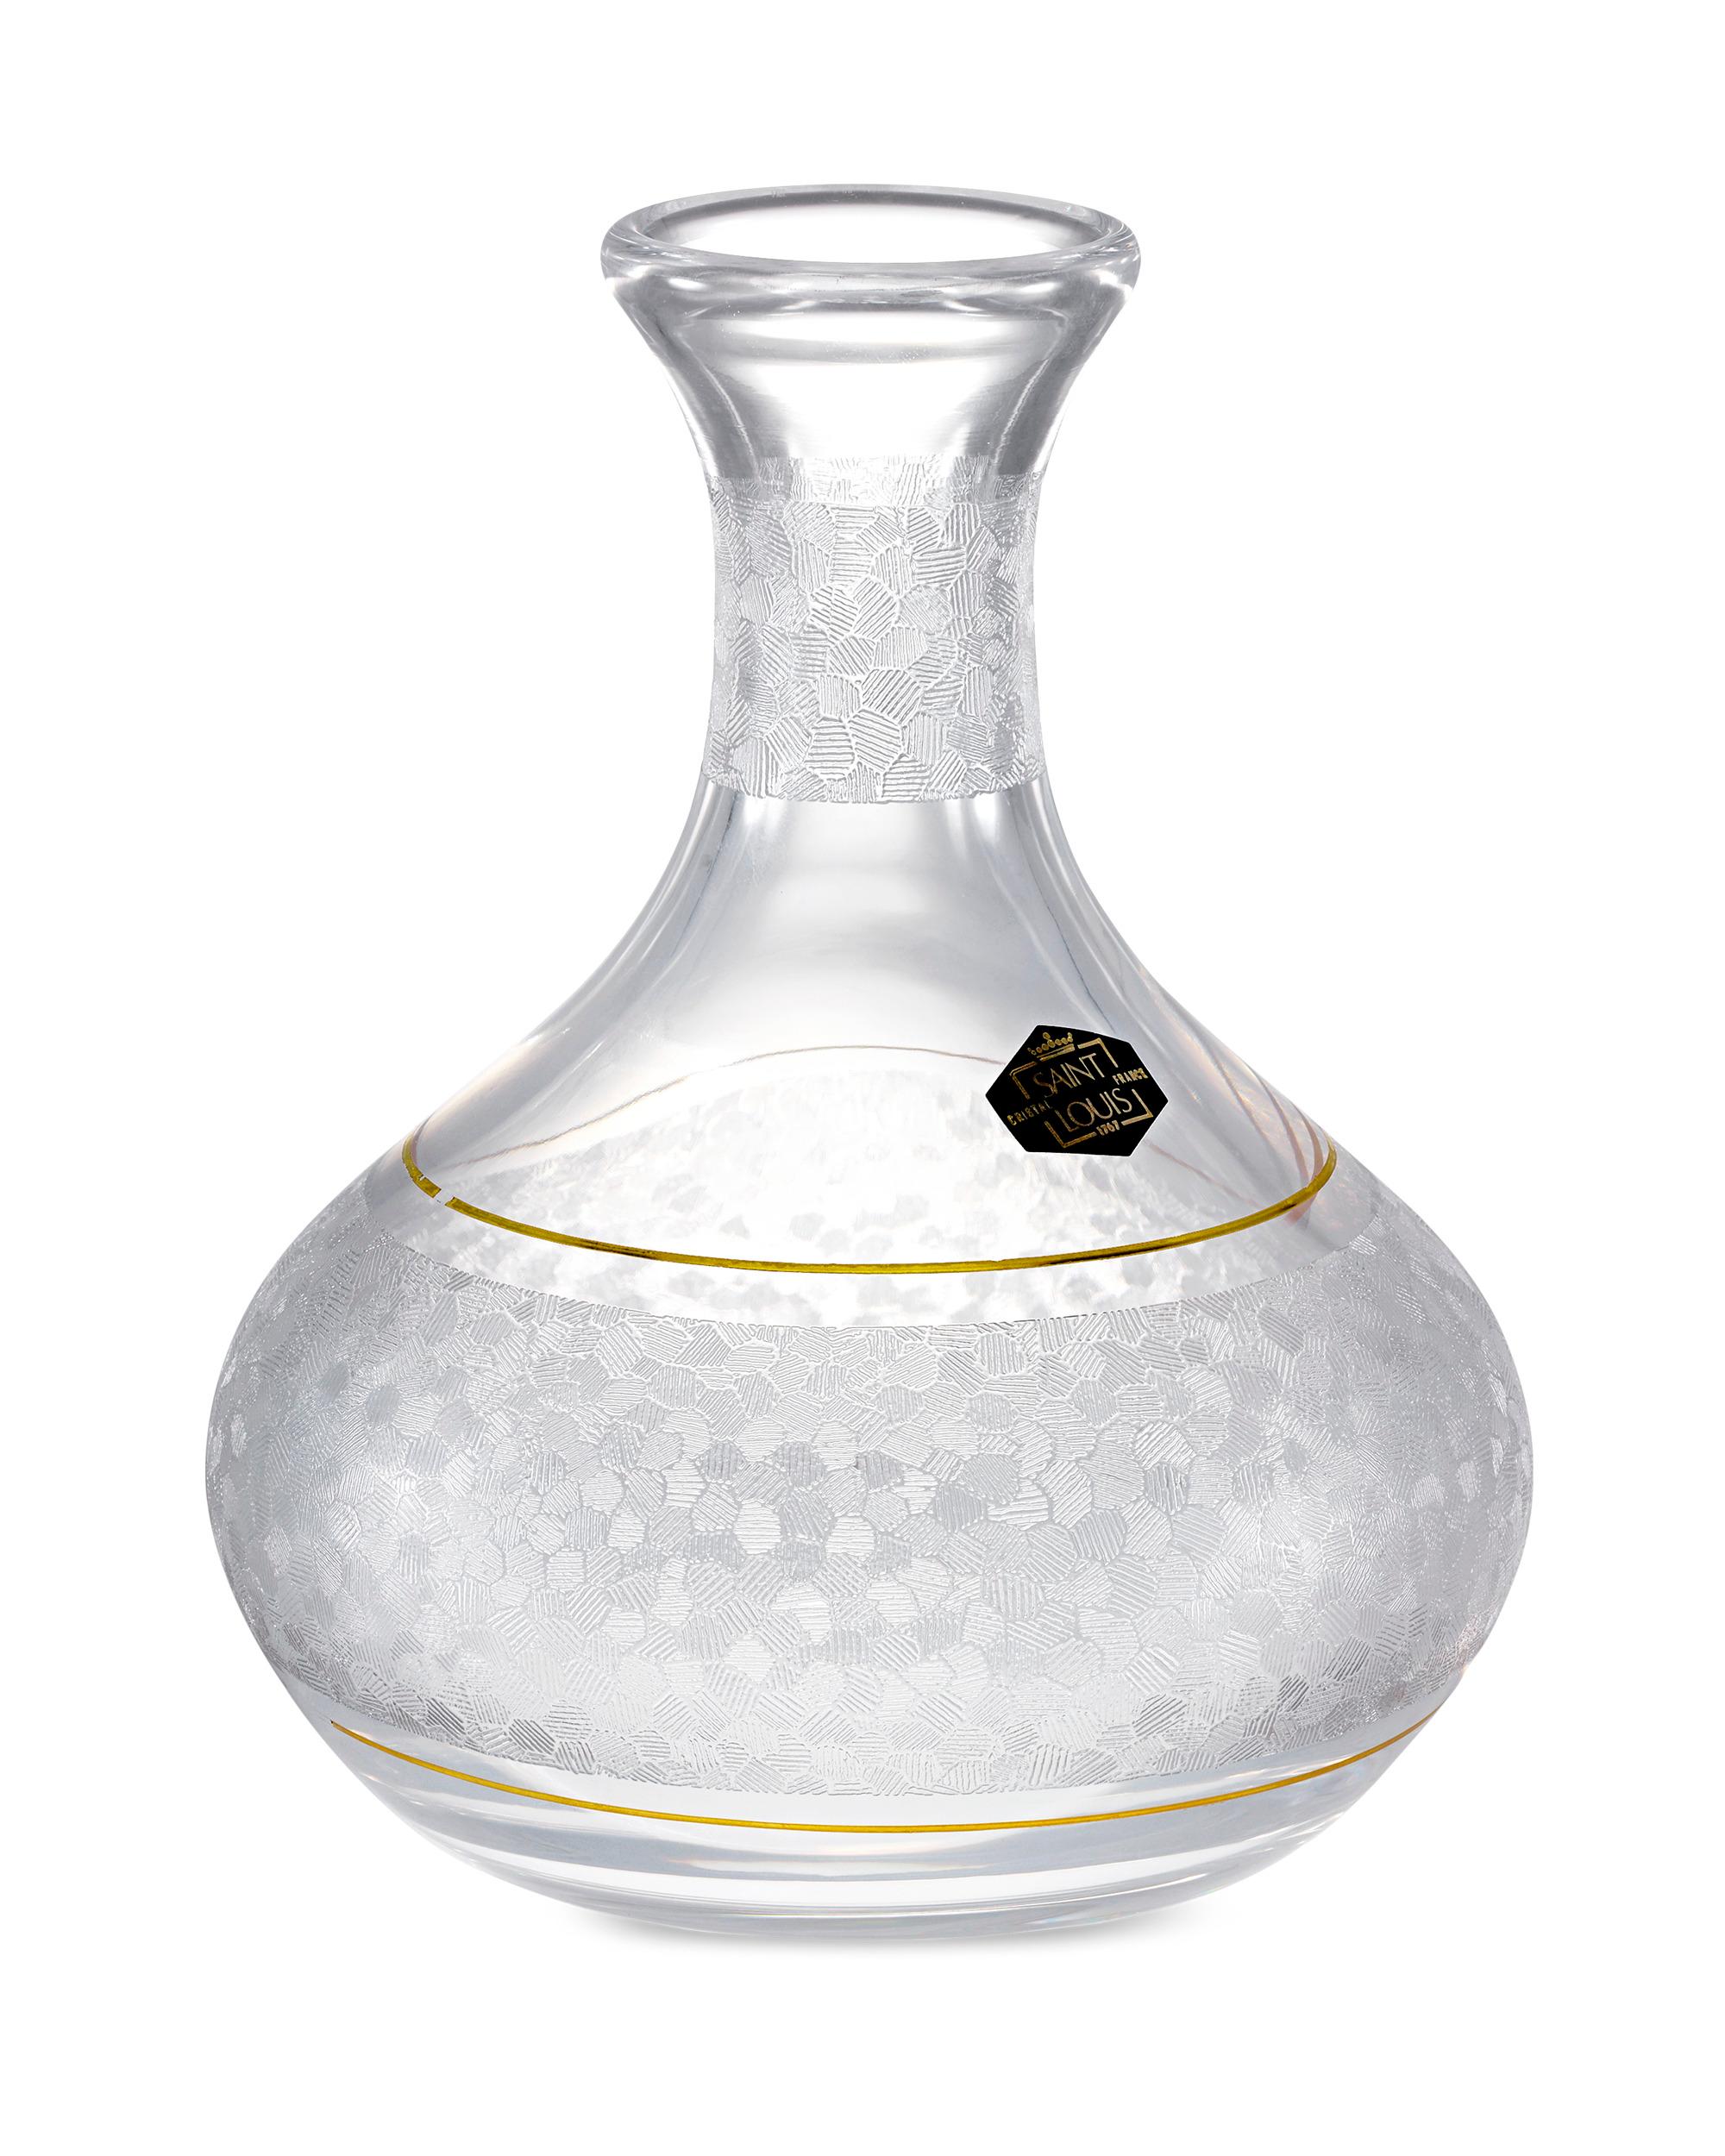 This elegant crystal wine decanter was crafted by the oldest and most respected glass manufacturer in Europe, Saint Louis crystal. Its clean, elongated form and intricate etching distinguish this beautiful piece of barware, and two bands of gilt